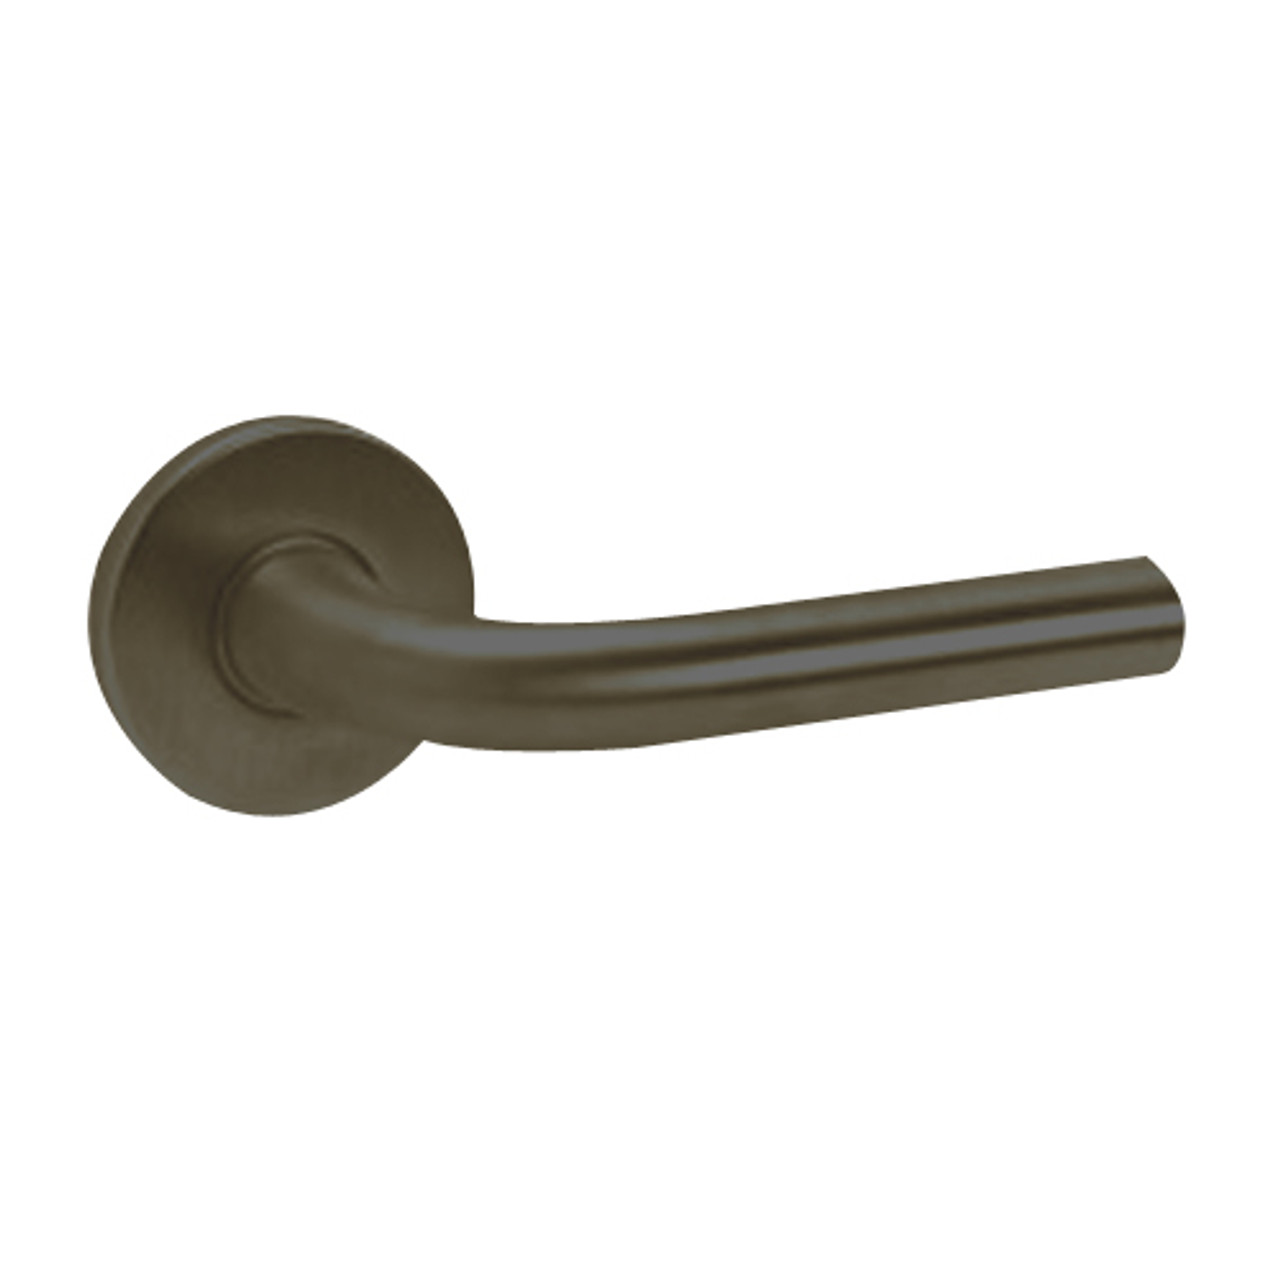 ML2067-RWF-613-CL7 Corbin Russwin ML2000 Series IC 7-Pin Less Core Mortise Apartment Locksets with Regis Lever in Oil Rubbed Bronze